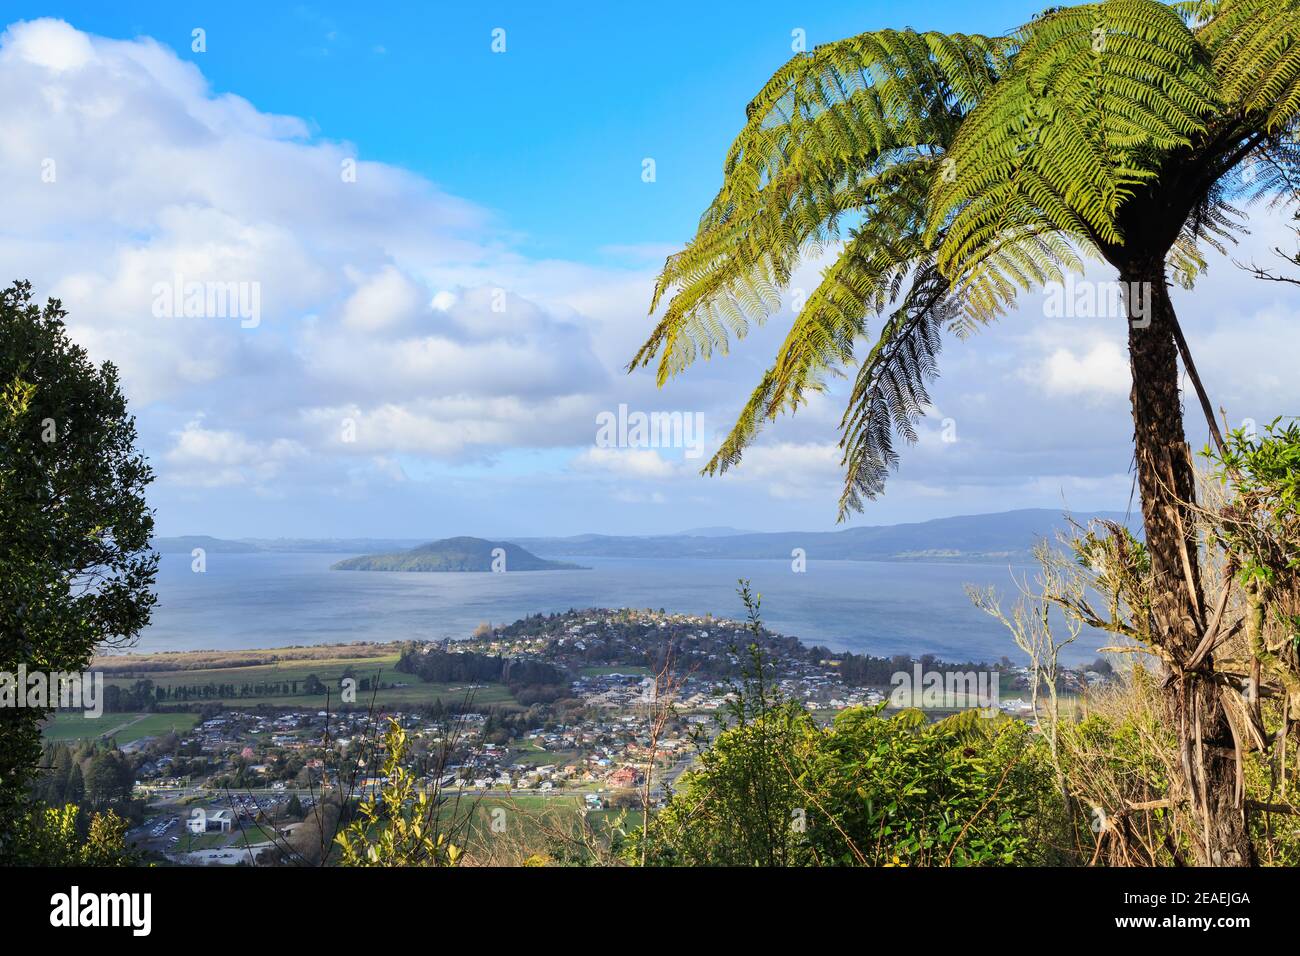 View of Rotorua, New Zealand, from Mount Ngongotaha. In the foreground are the suburbs of Fairy Springs and Kawaha Point, with Lake Rotorua behind Stock Photo